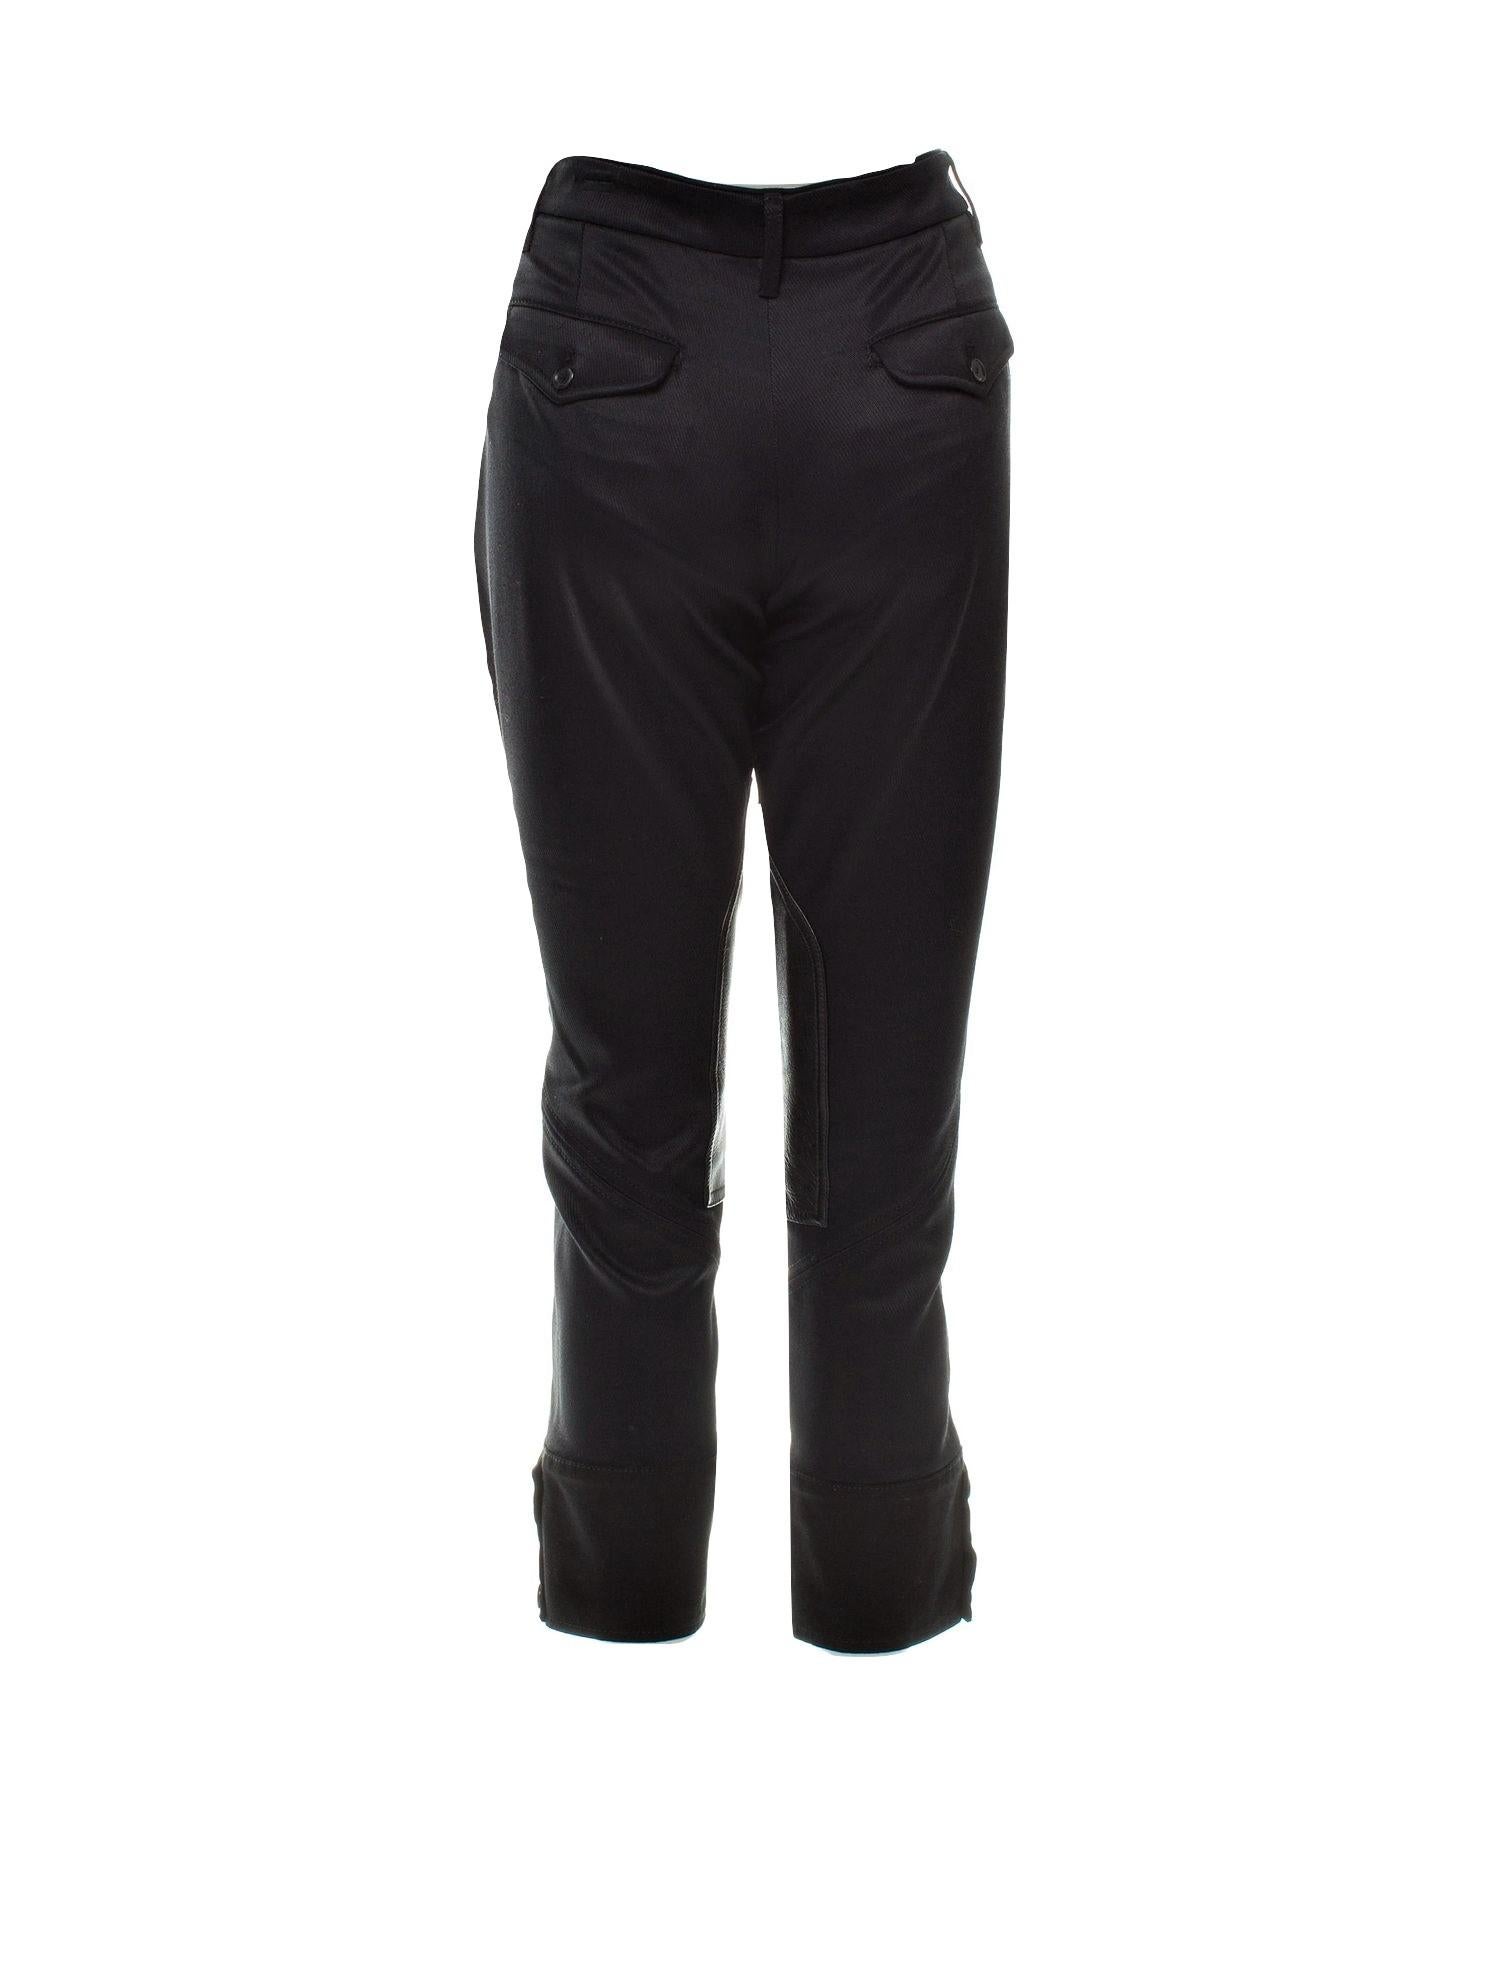 New Gucci Black Runway Pants F/W 2008 Sz 42 With Tags $1725 In New Condition In Leesburg, VA